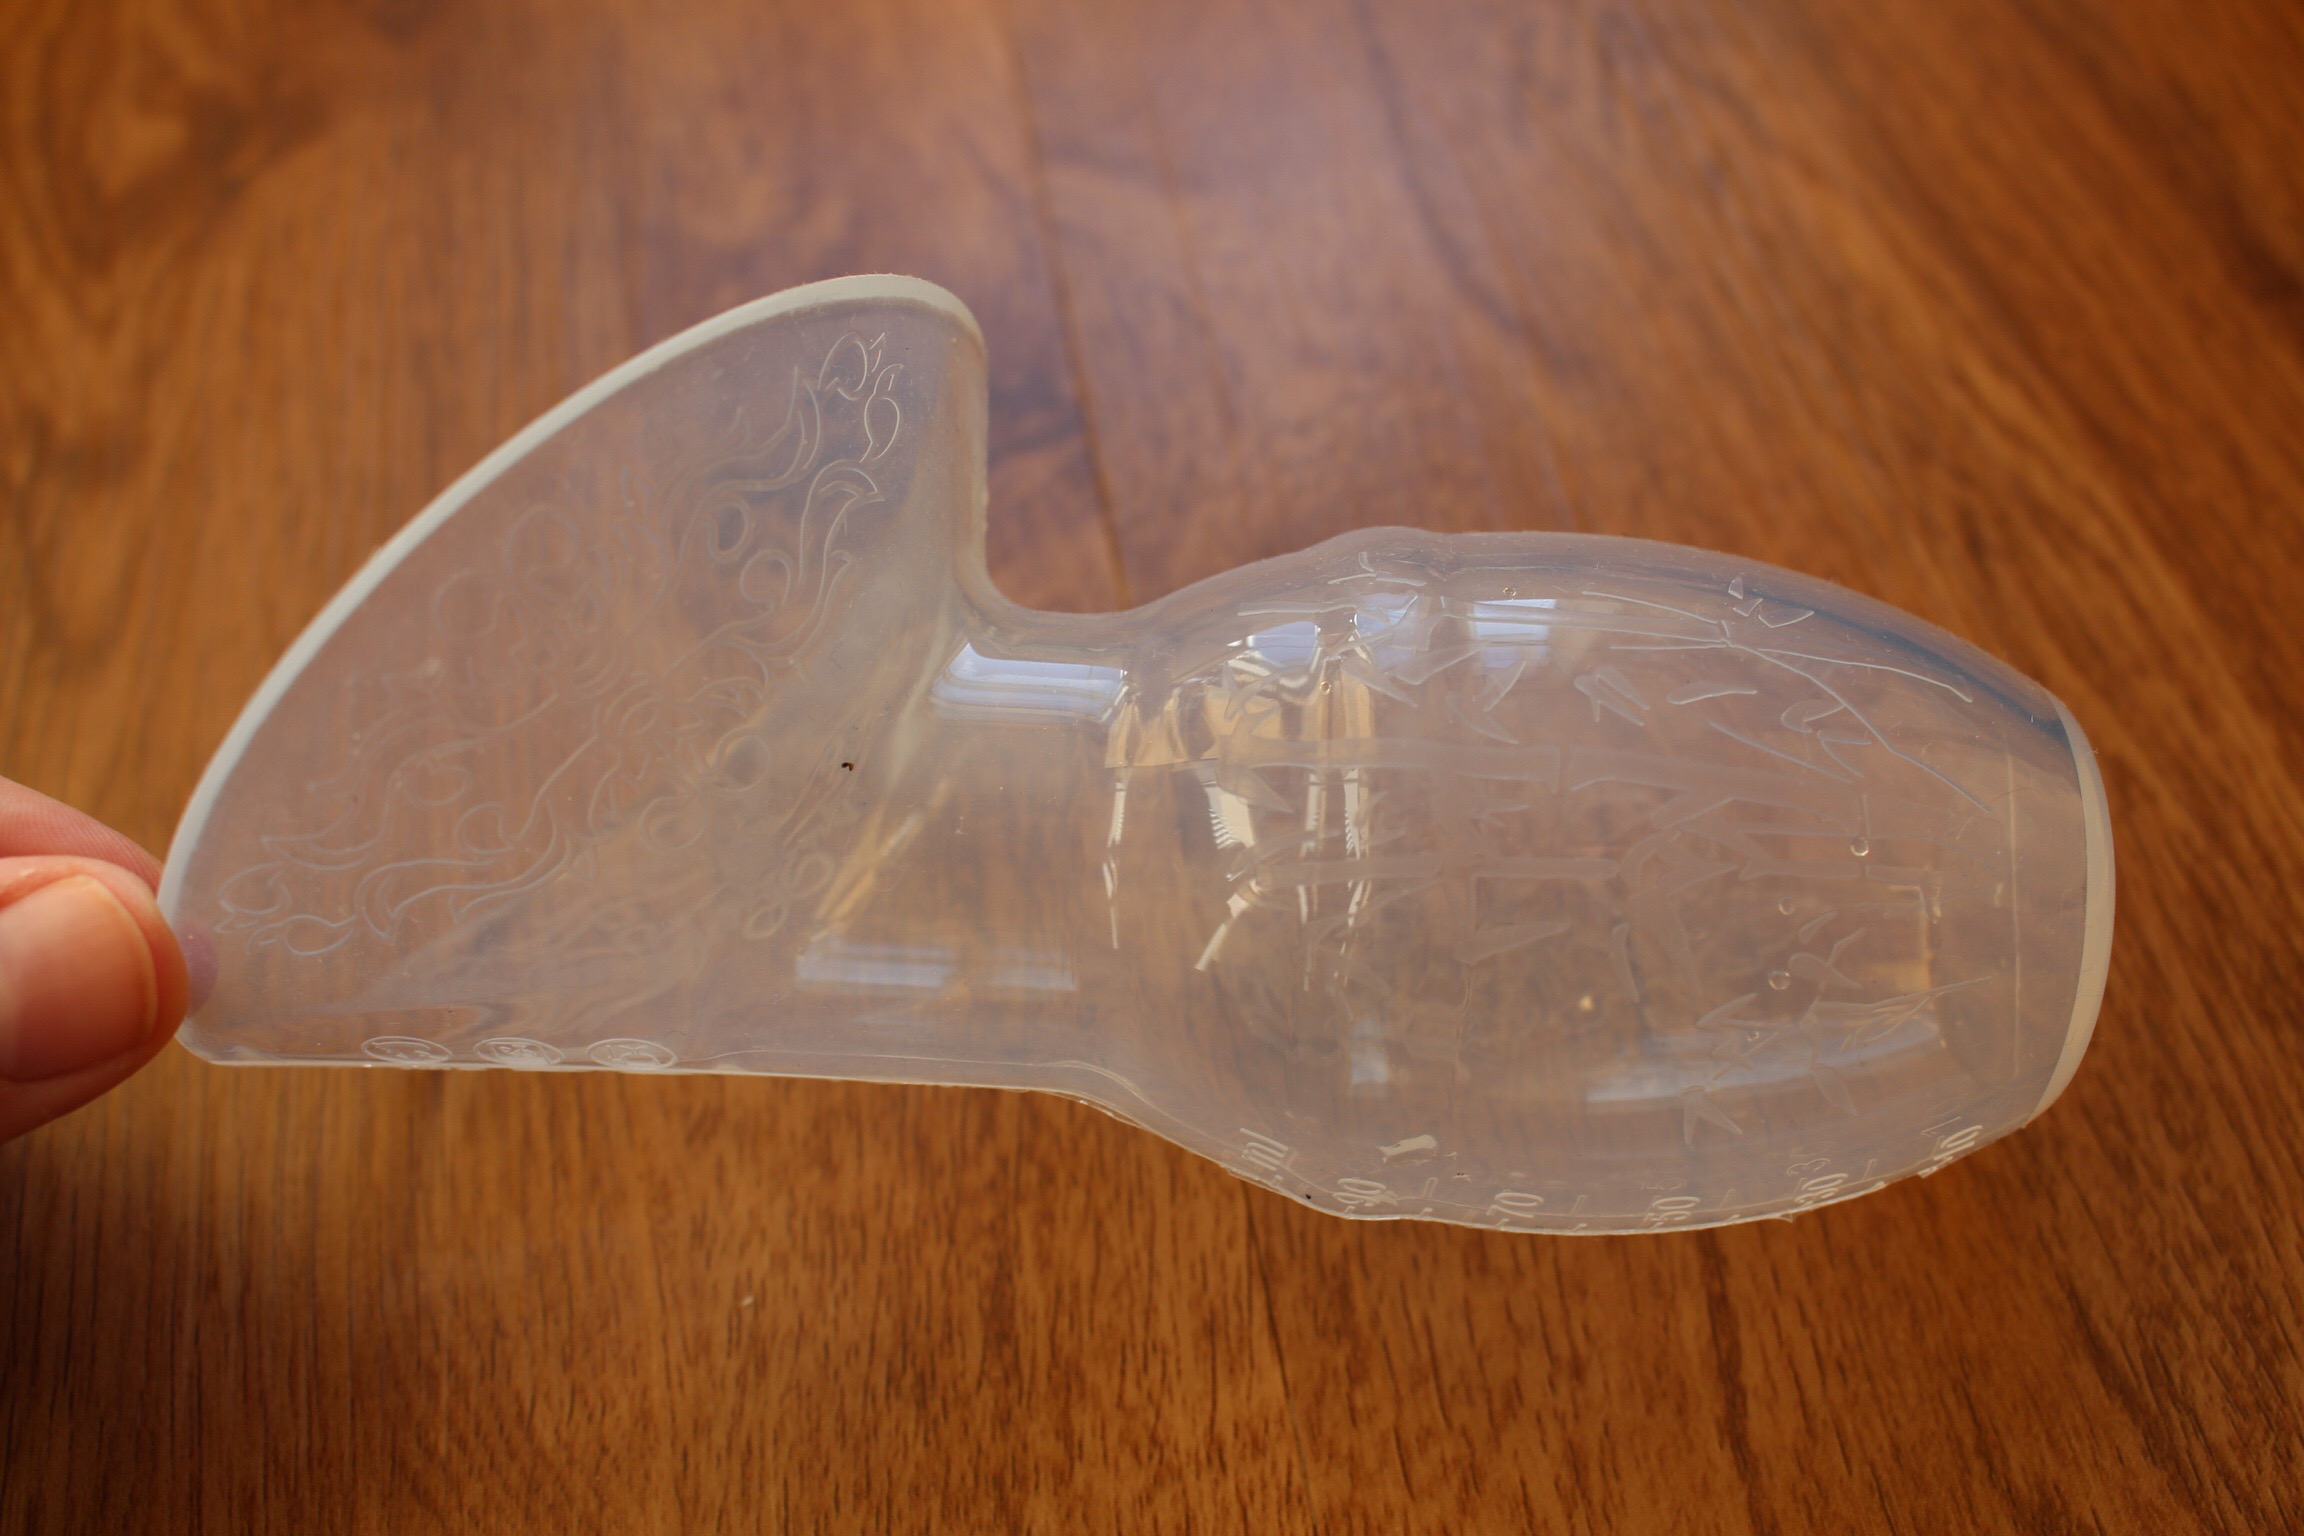 A close up shot of the embossing on the Haakaa Breast Pump bottle